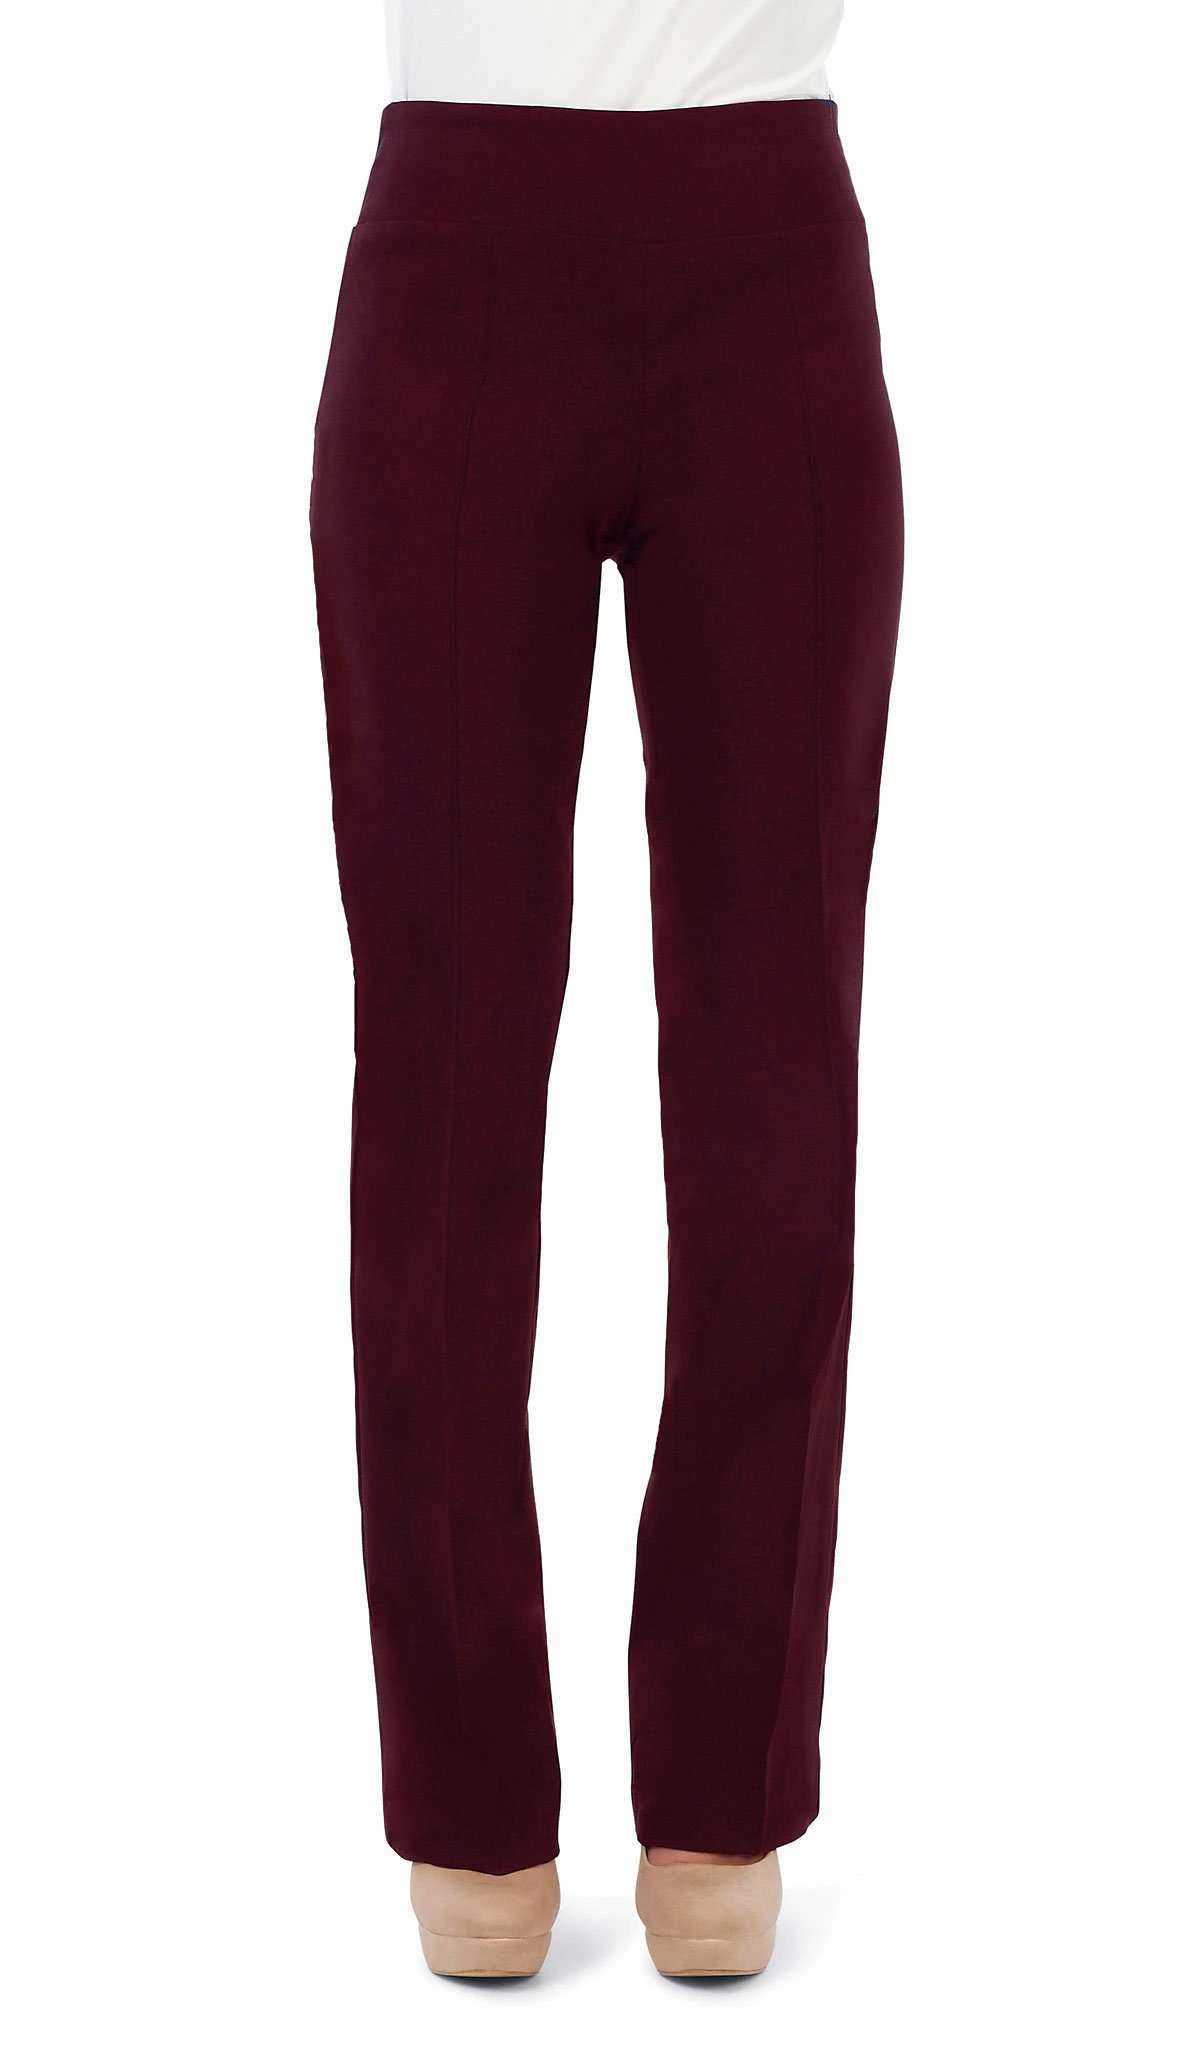 Ladies Pants Wine Burgundy Stretch Pull on Comfort Pant Flattering True to  Size Fit Best Selling Pant Sizes S-XLARGE